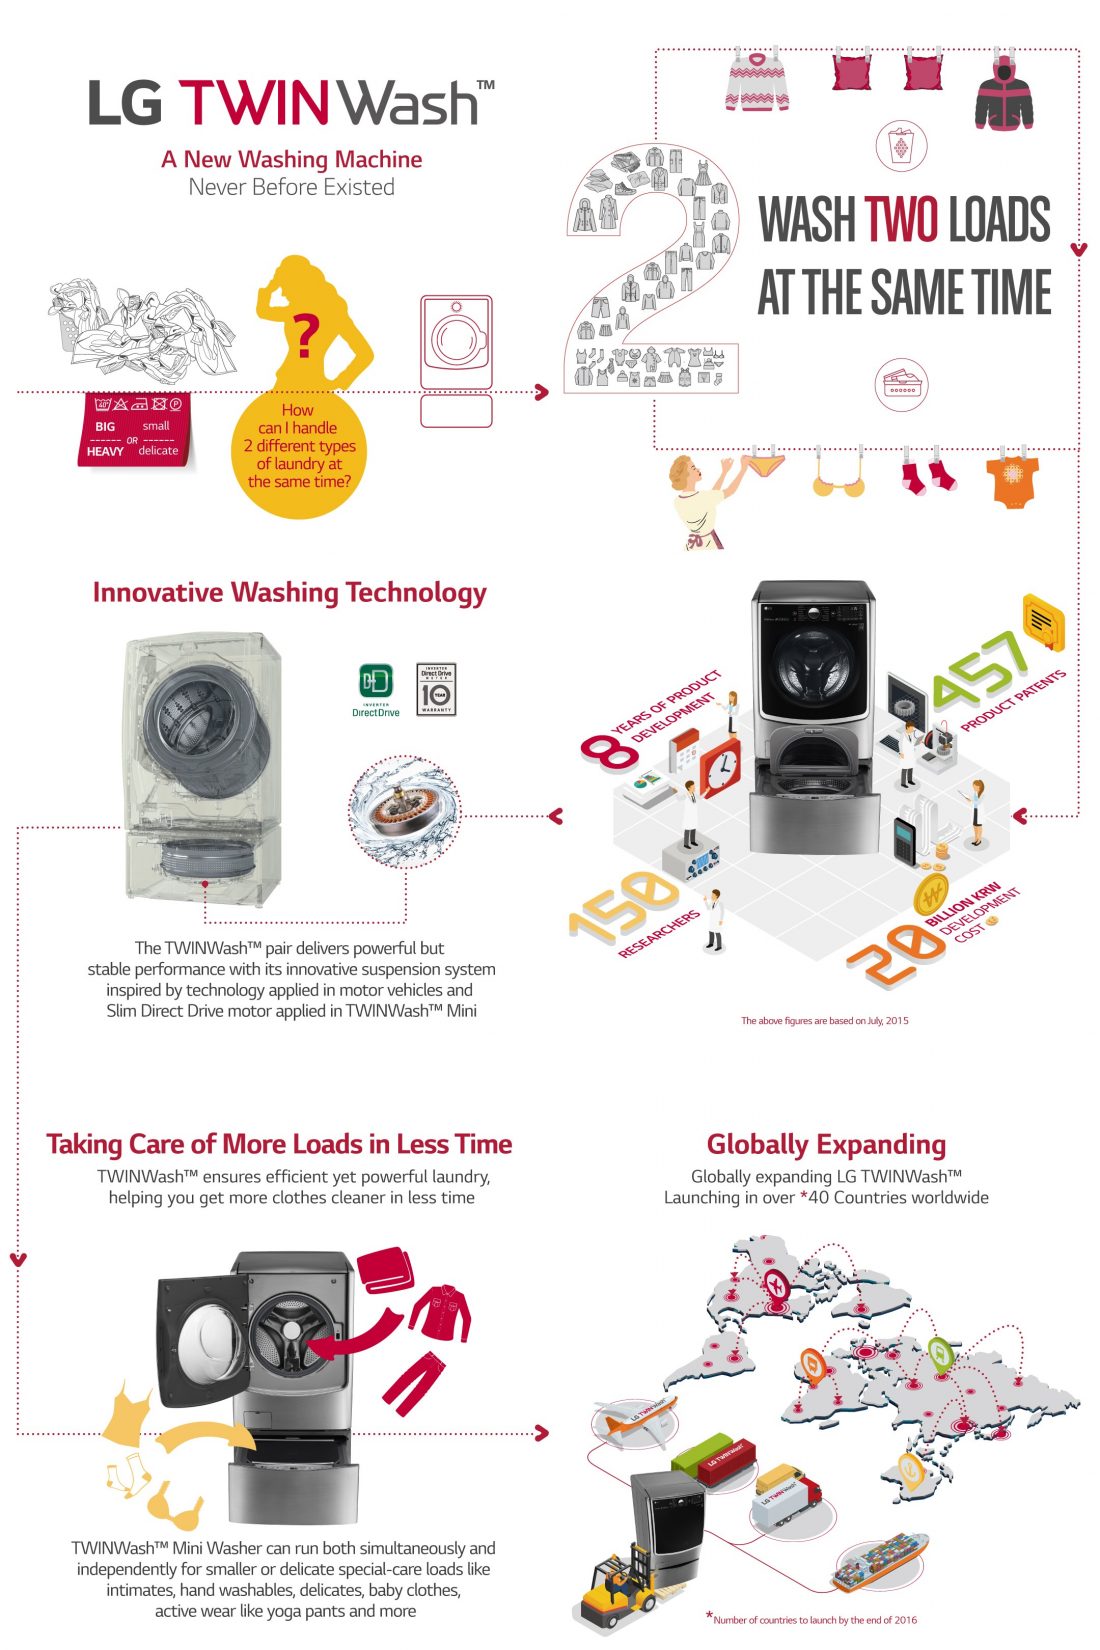 This infographic introduces the key features and R&D investment indices of the LG TWINWash washing machines that deal with two laundry loads at once to reduce laundry time.